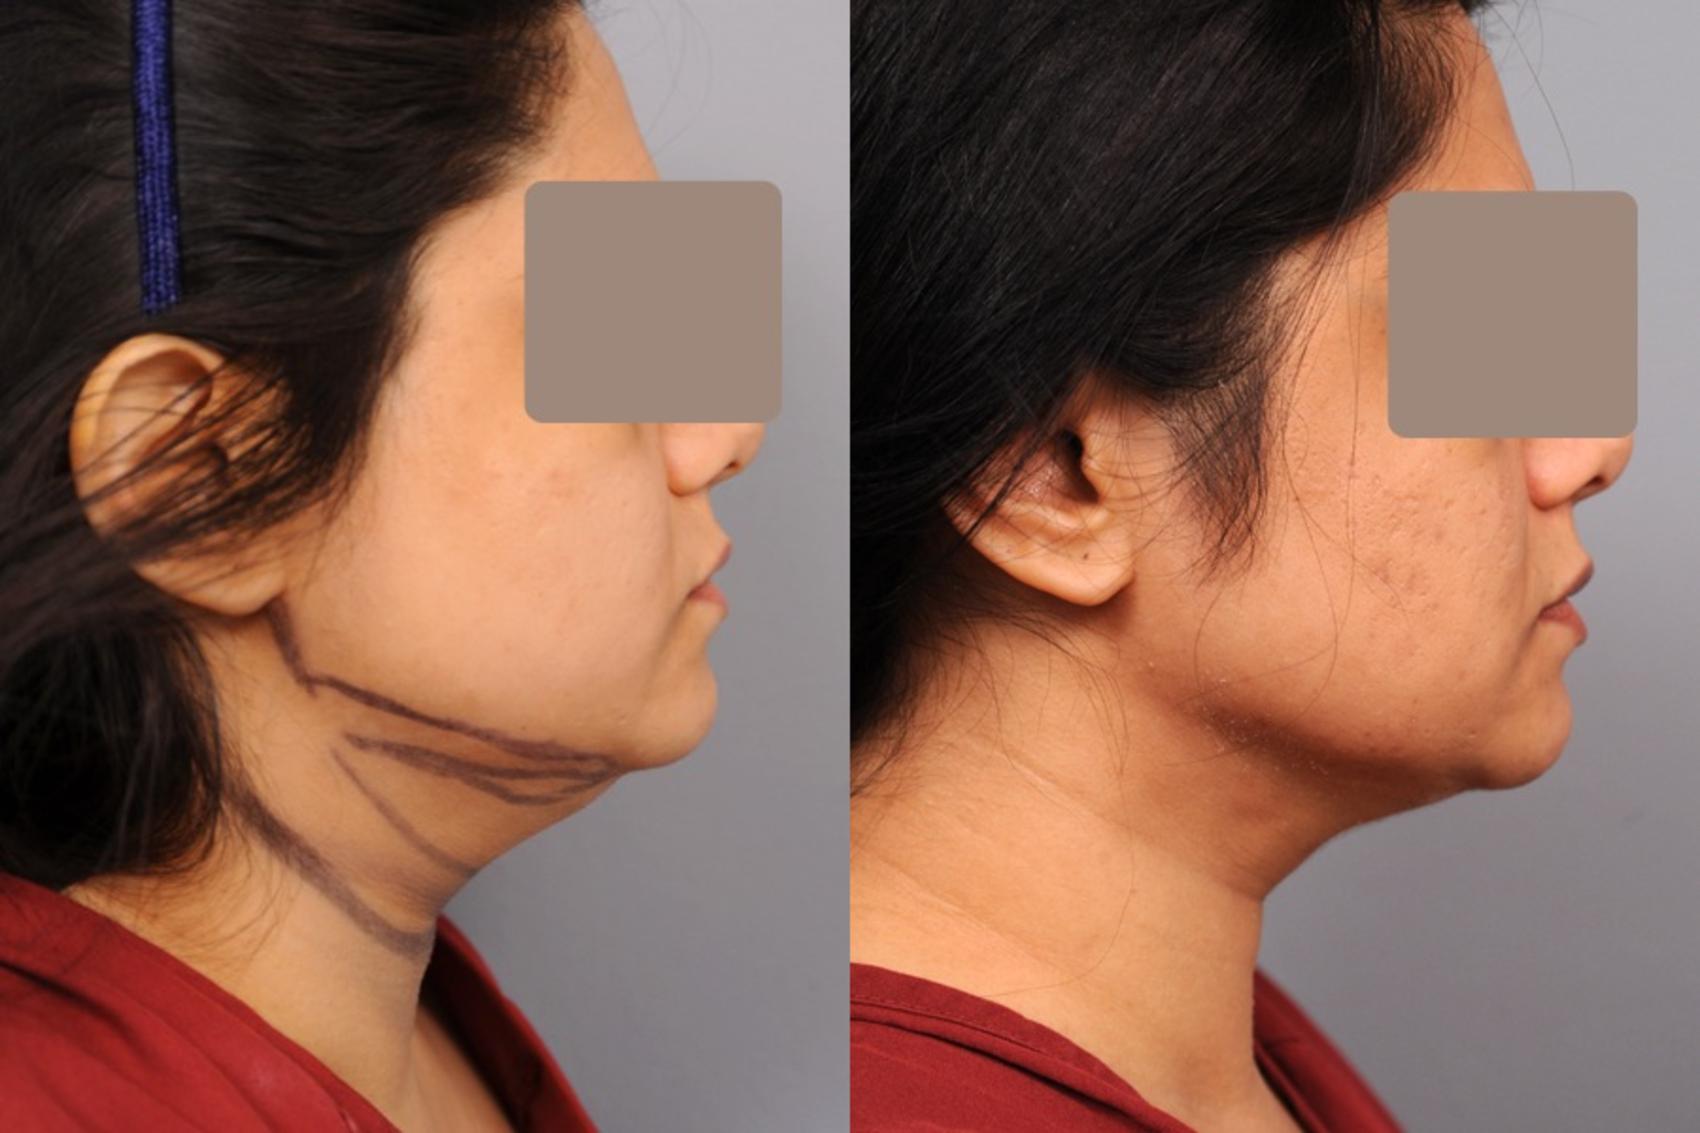 Neck Liposuction With Smartlipo In New York